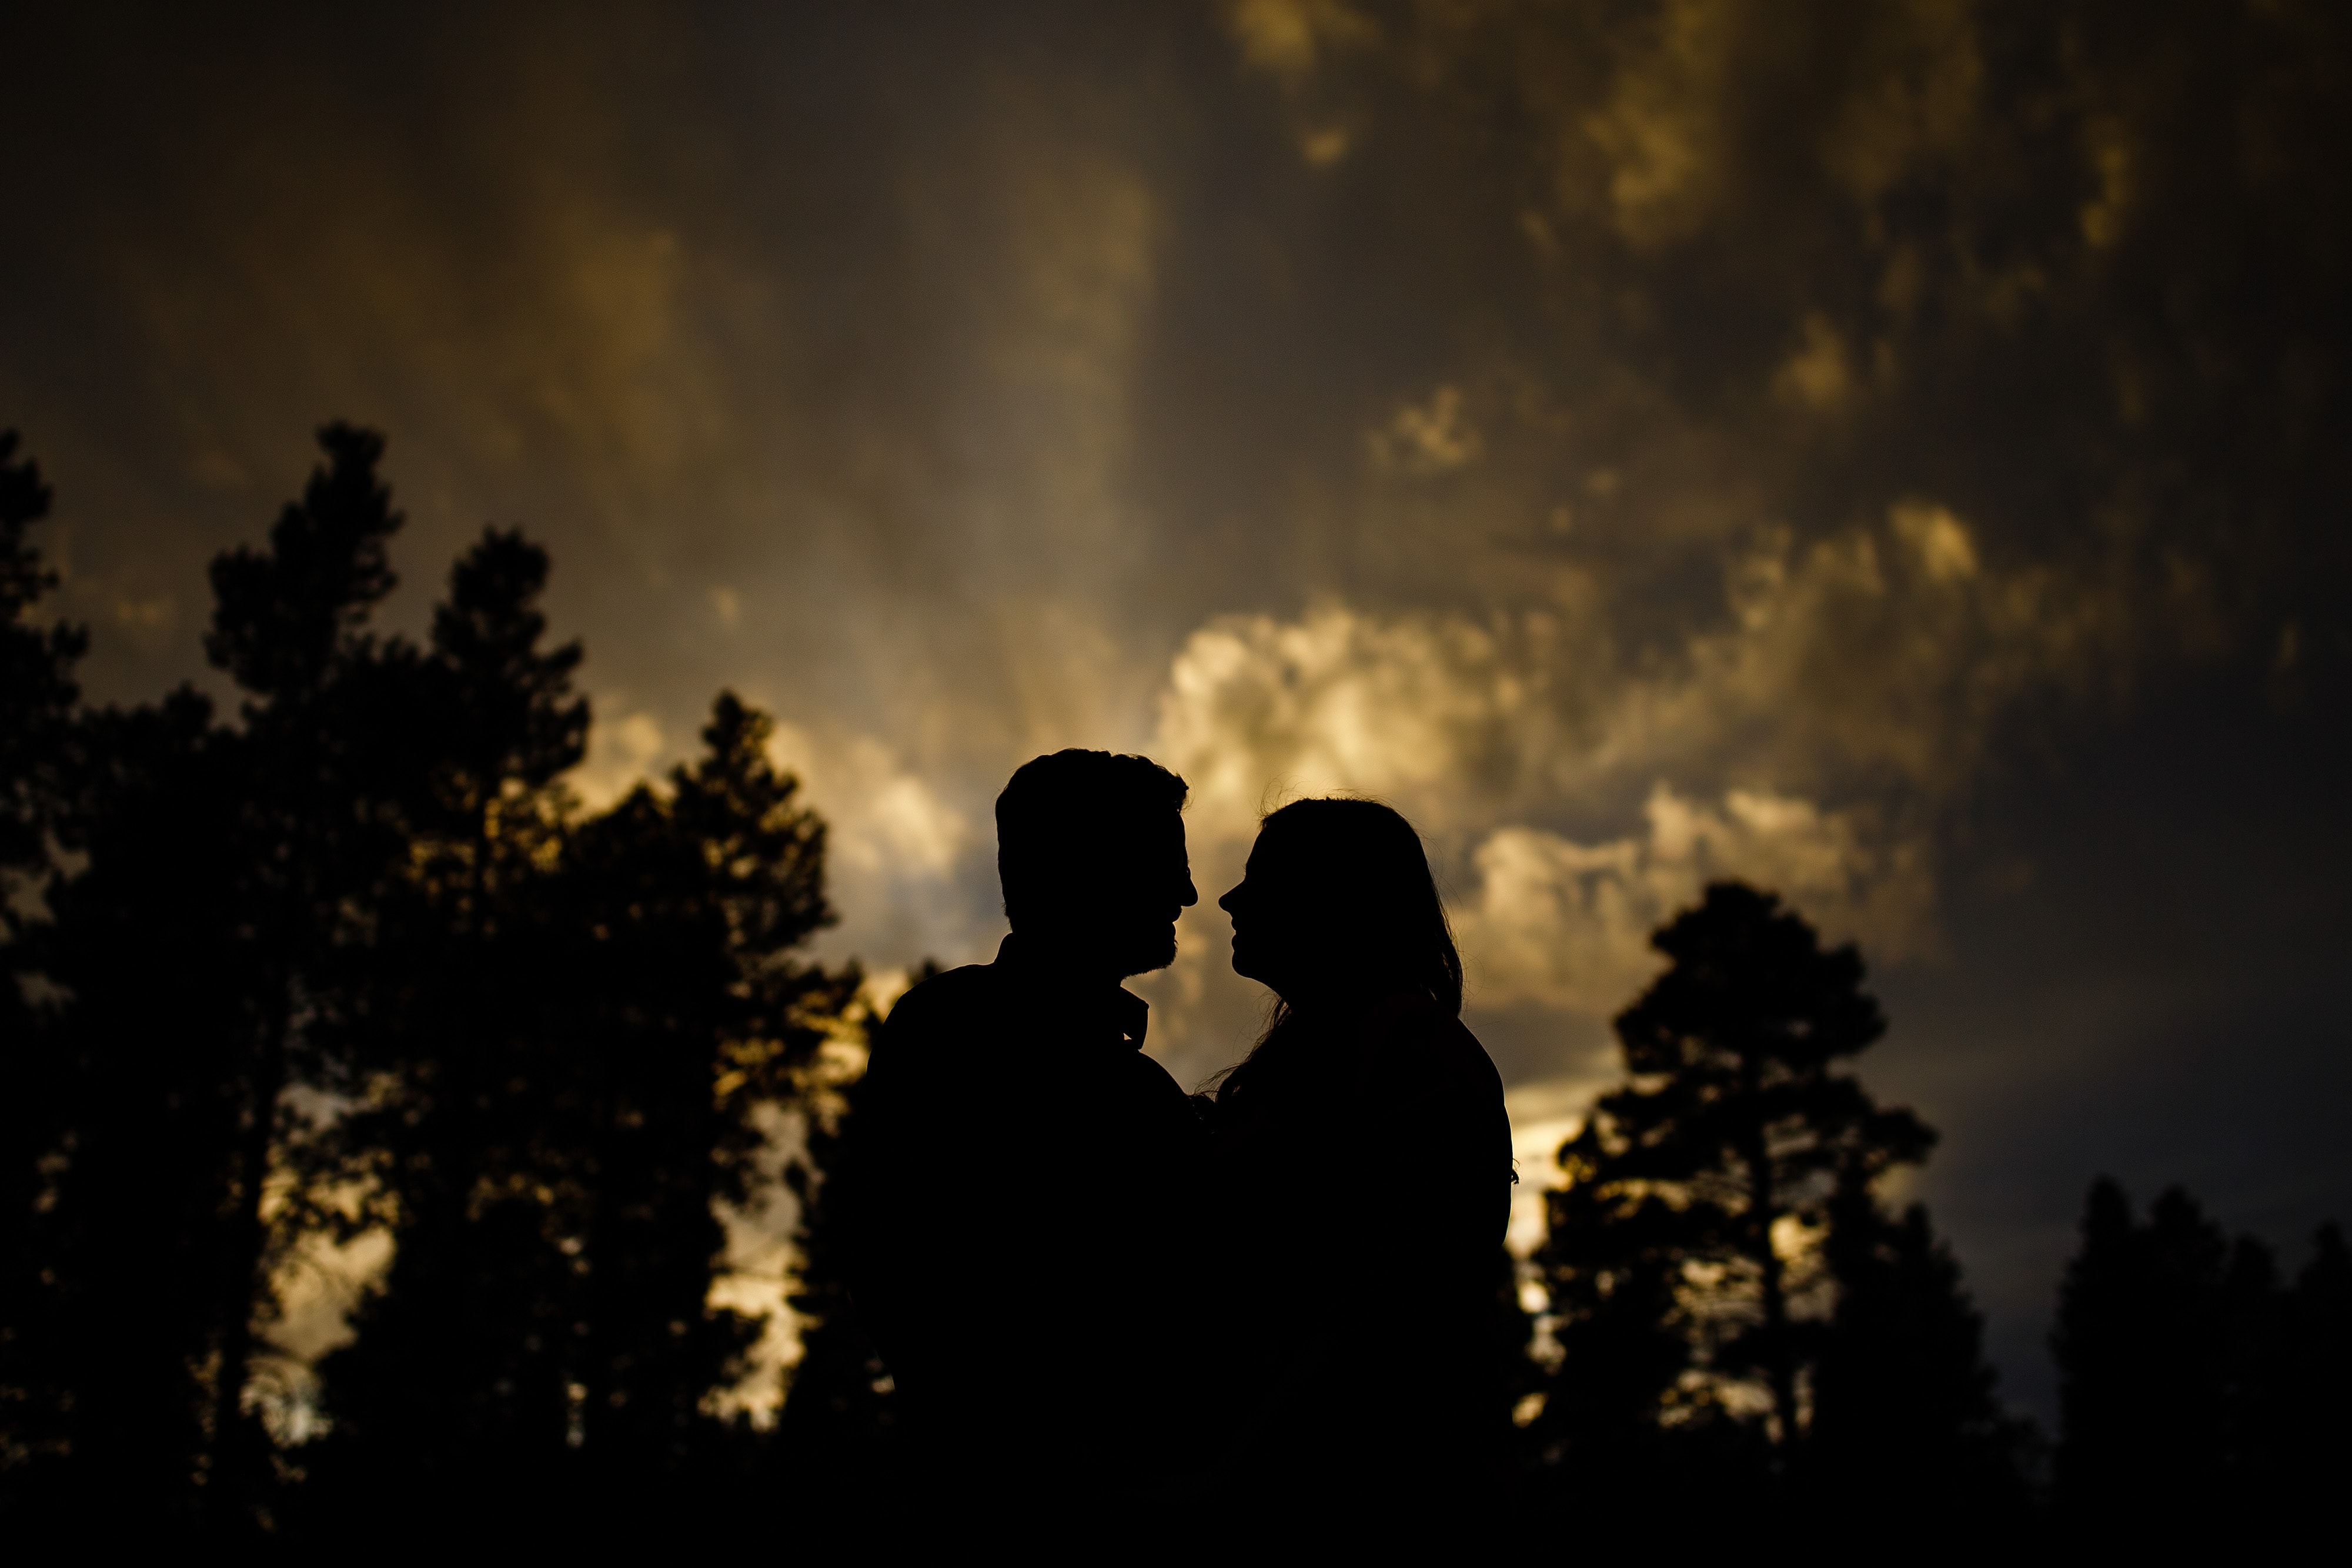 Brian and Kate are silhouetted against the sessting sky